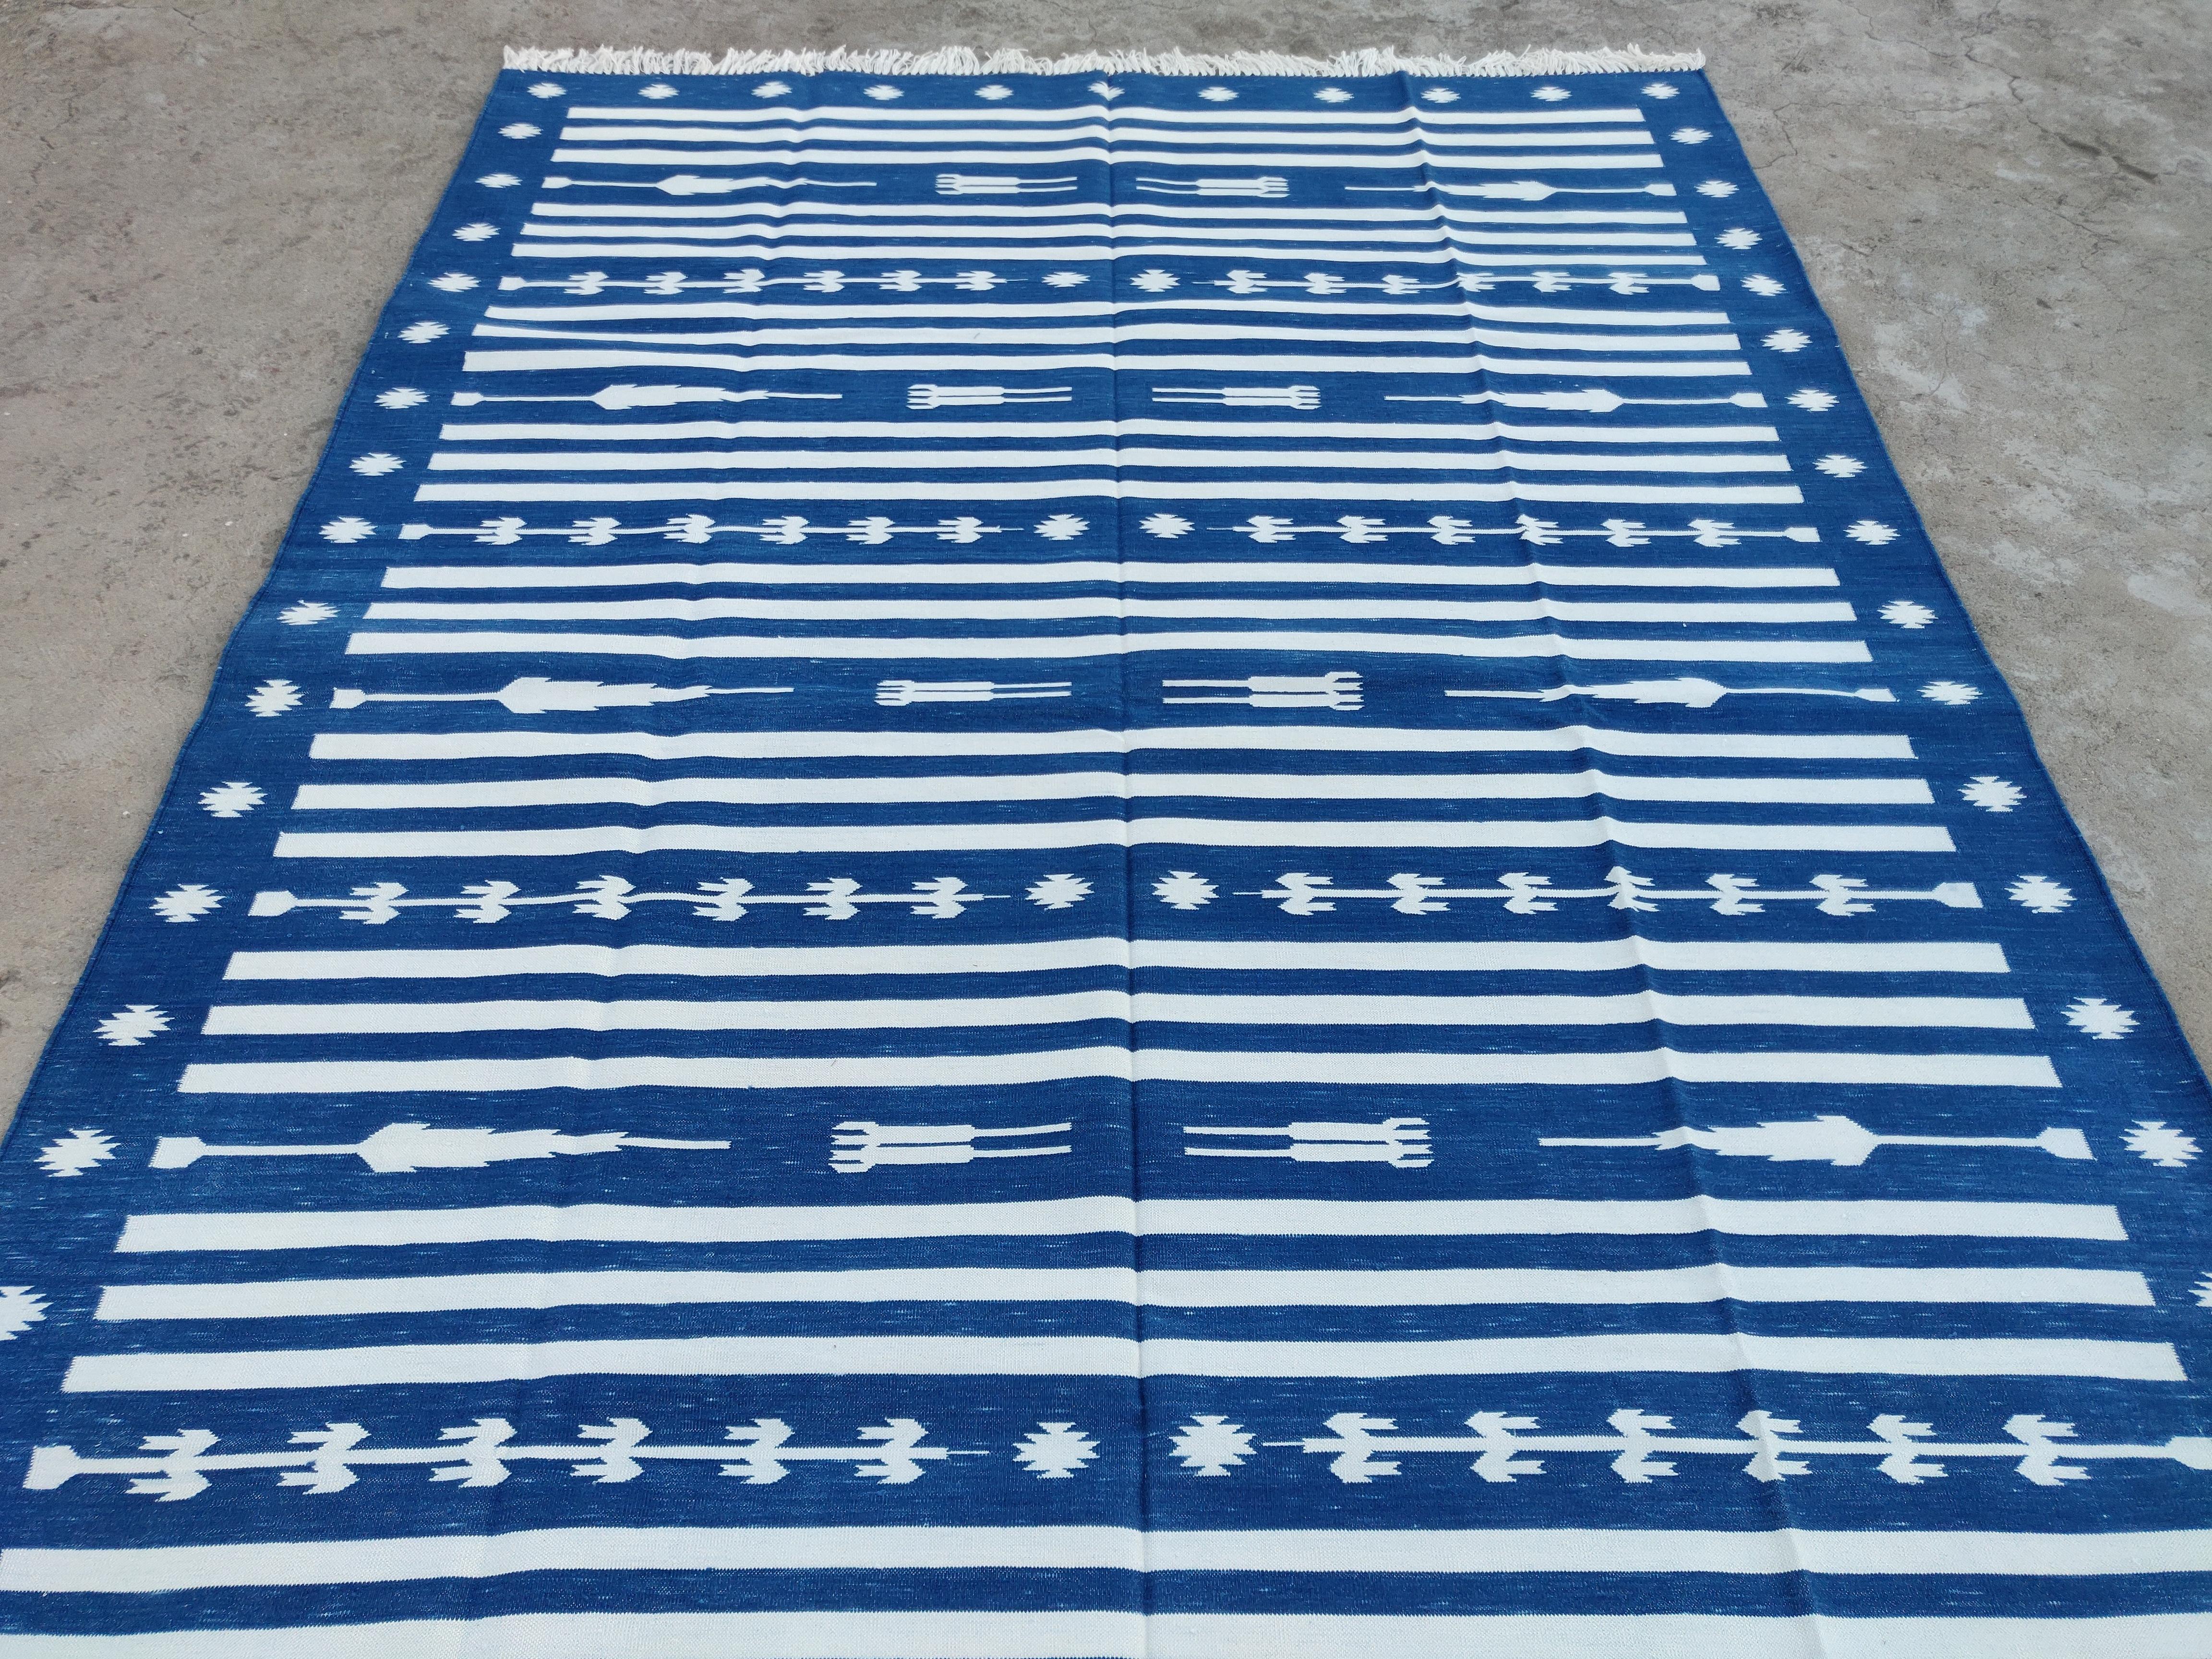 Contemporary Handmade Cotton Area Flat Weave Rug, 6x9 Blue And White Striped Indian Dhurrie For Sale